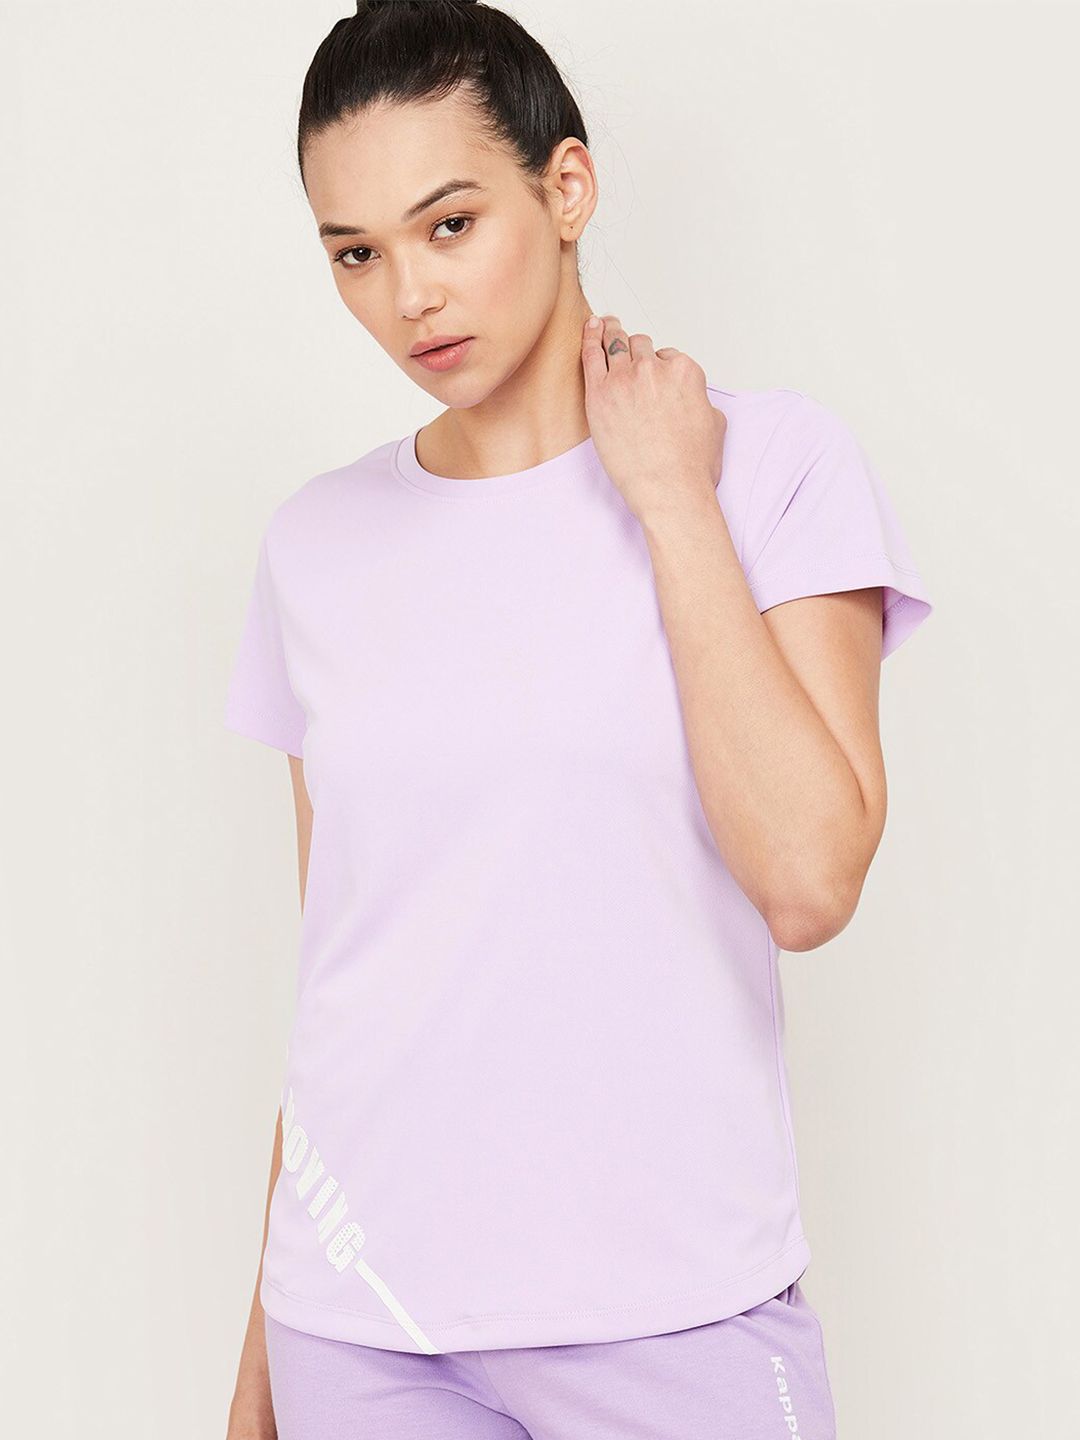 Kappa Women Lavender Solid Training or Gym T-shirt Price in India